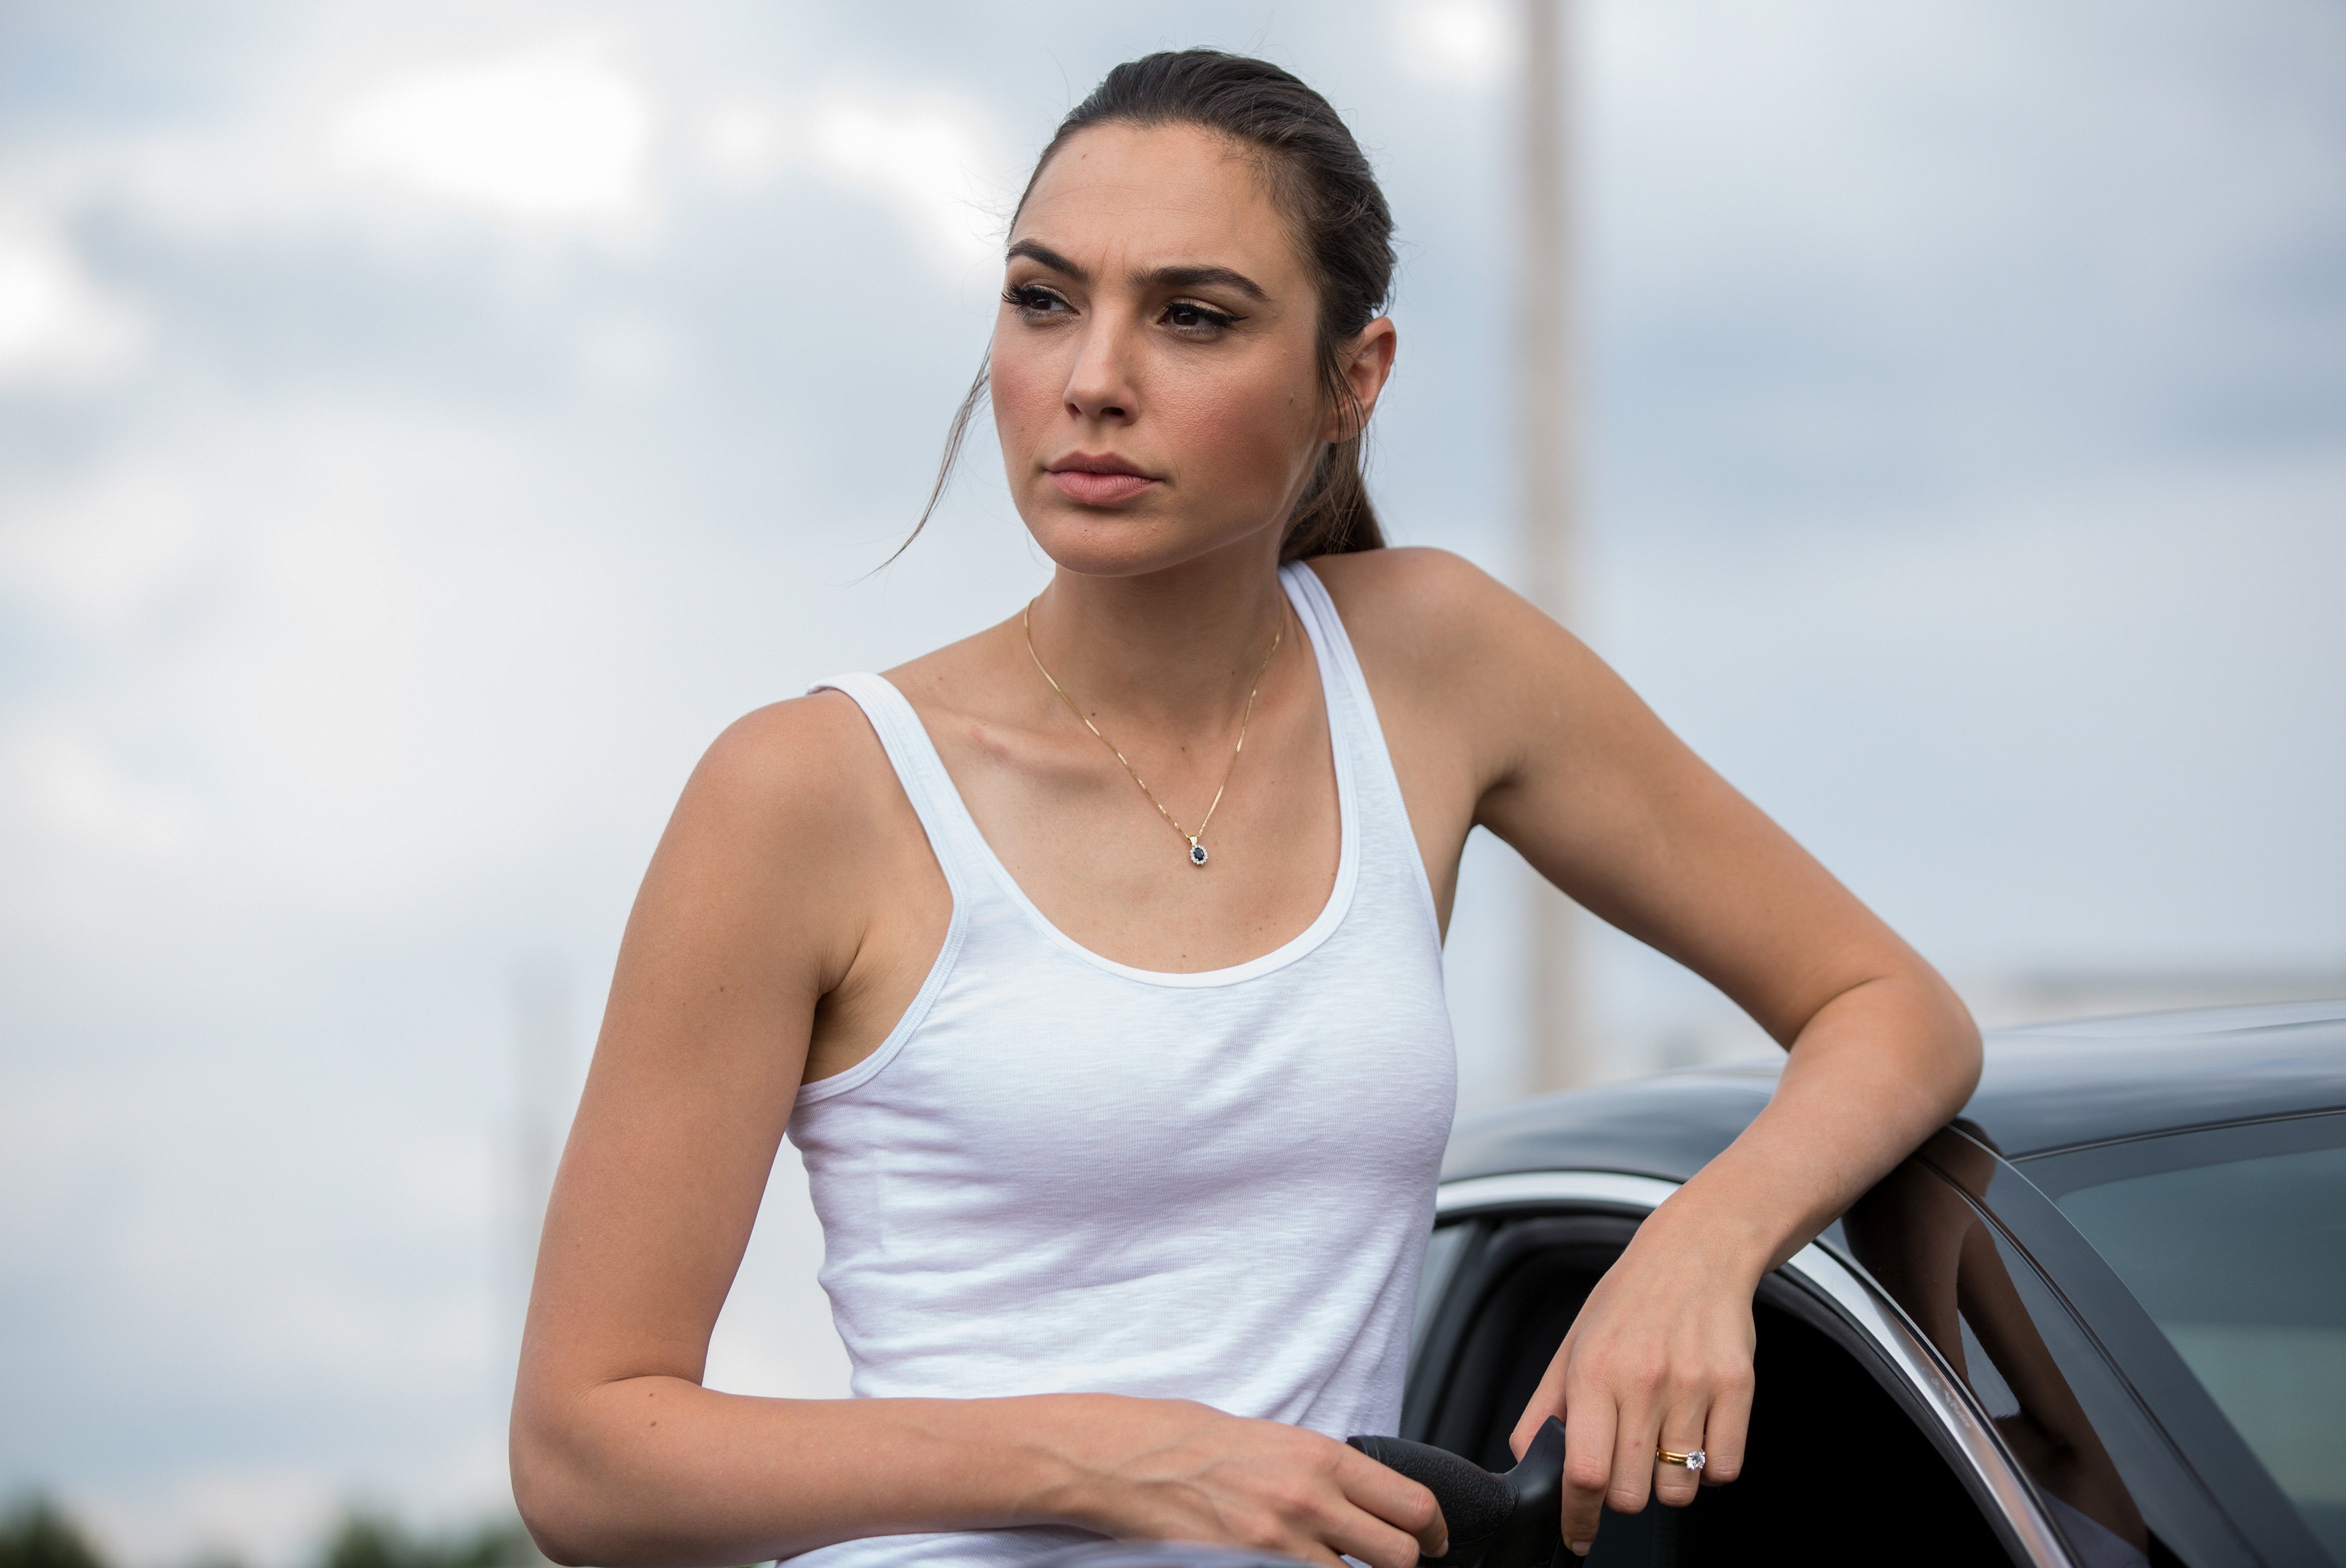 People 4028x2692 Gal Gadot actress women tank top white tops Fast and Furious